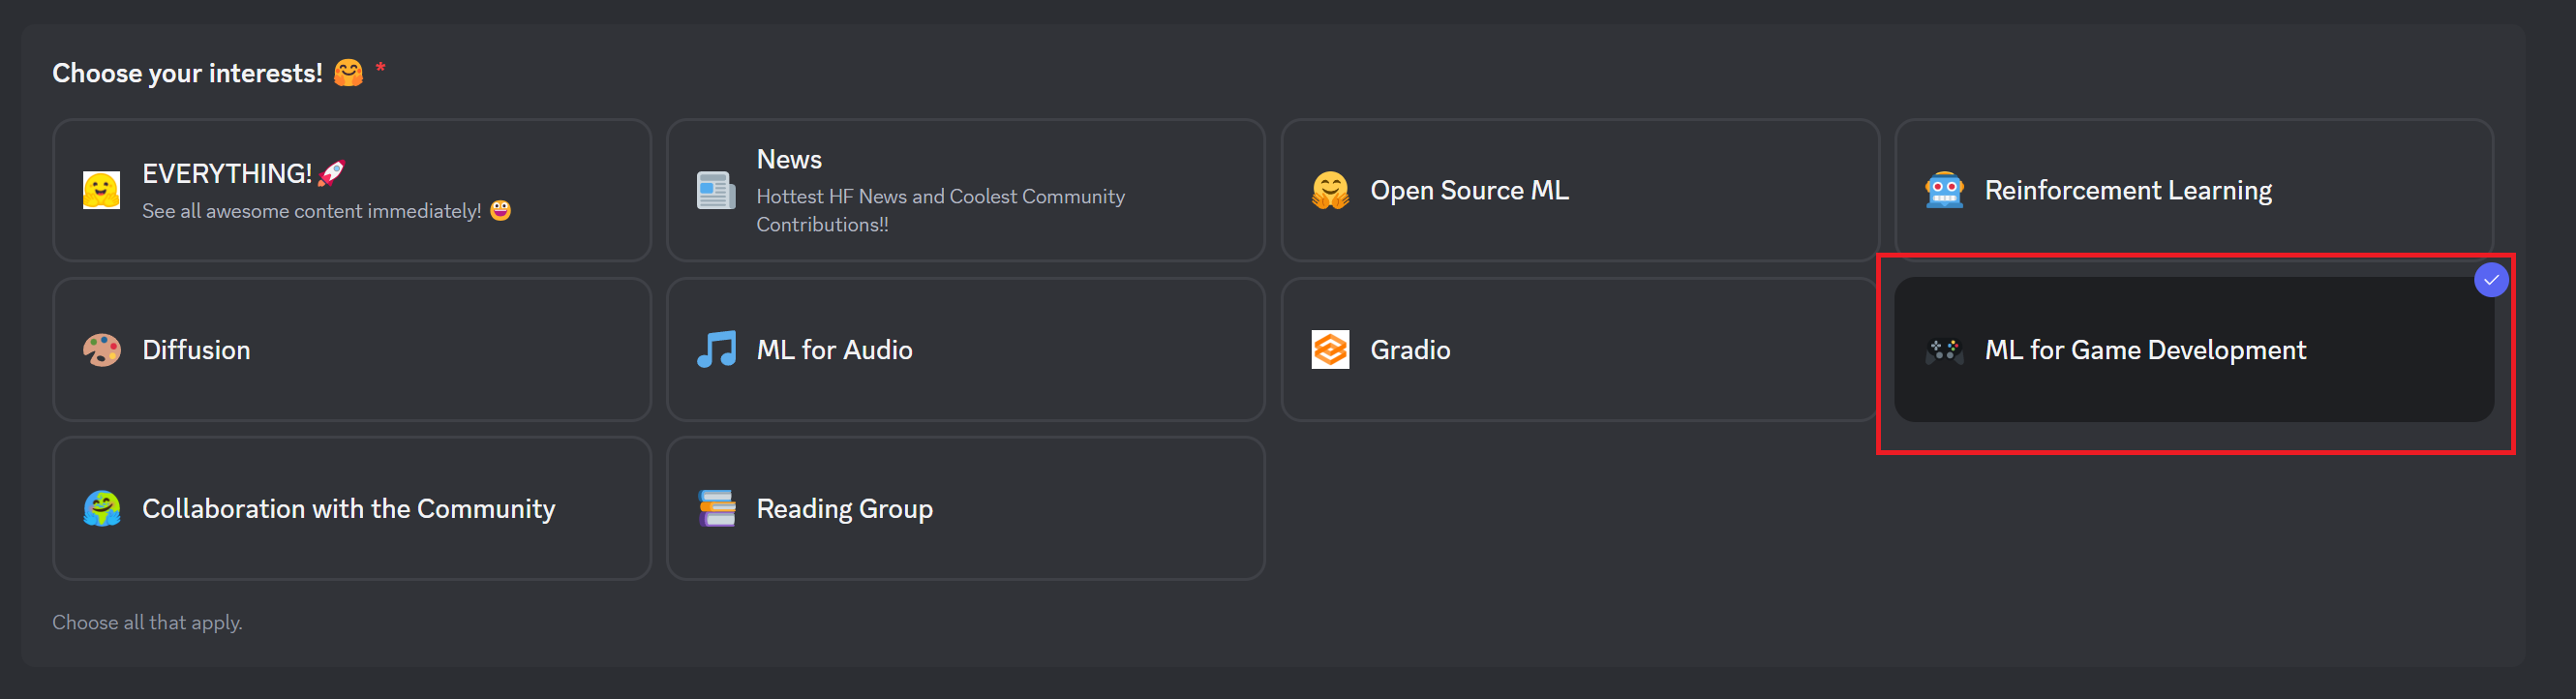 ML for Game Development selection in Discord